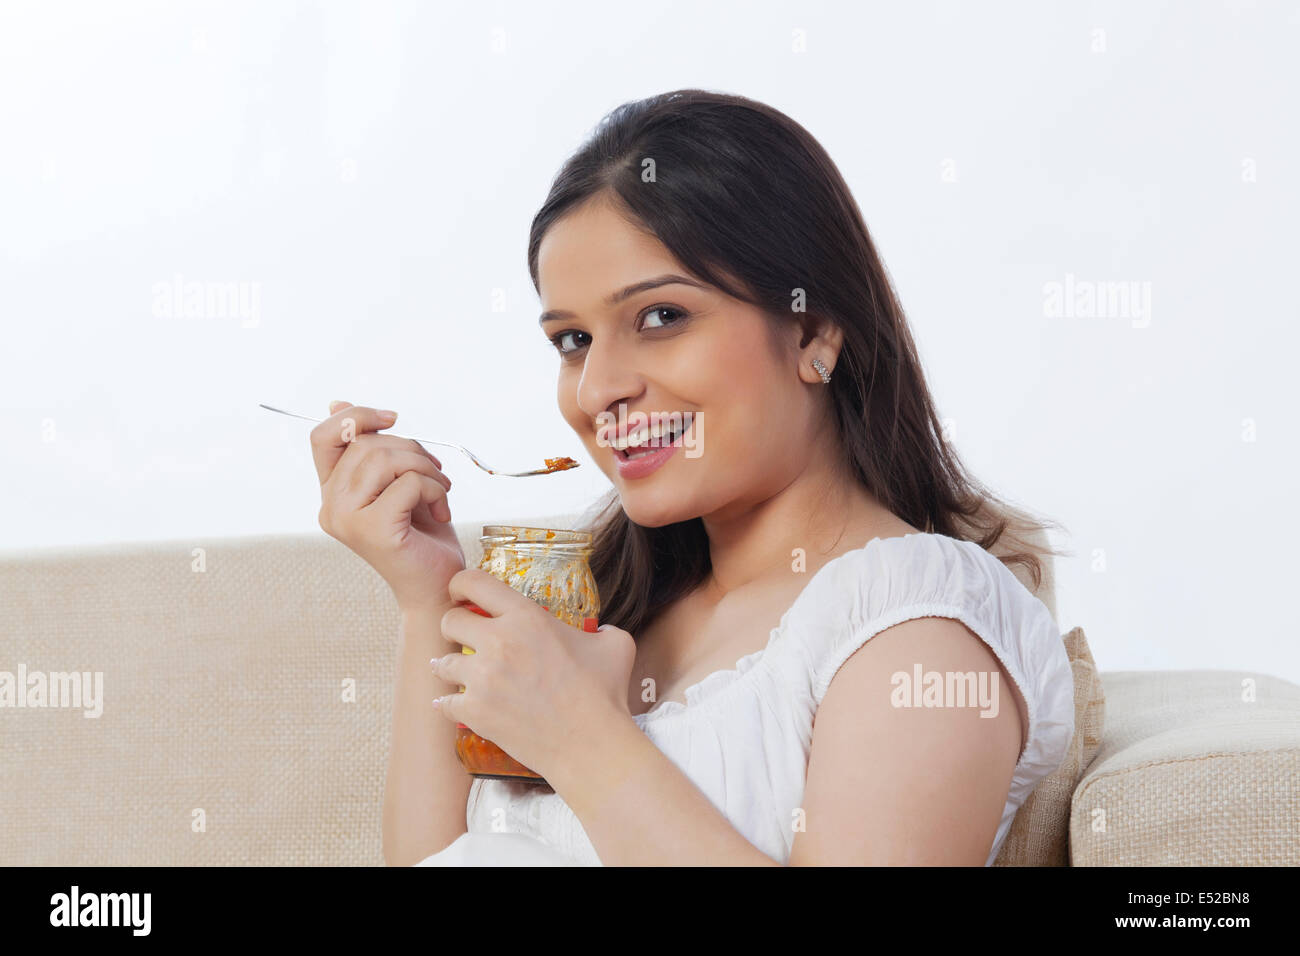 Pregnant woman eating pickle Stock Photo